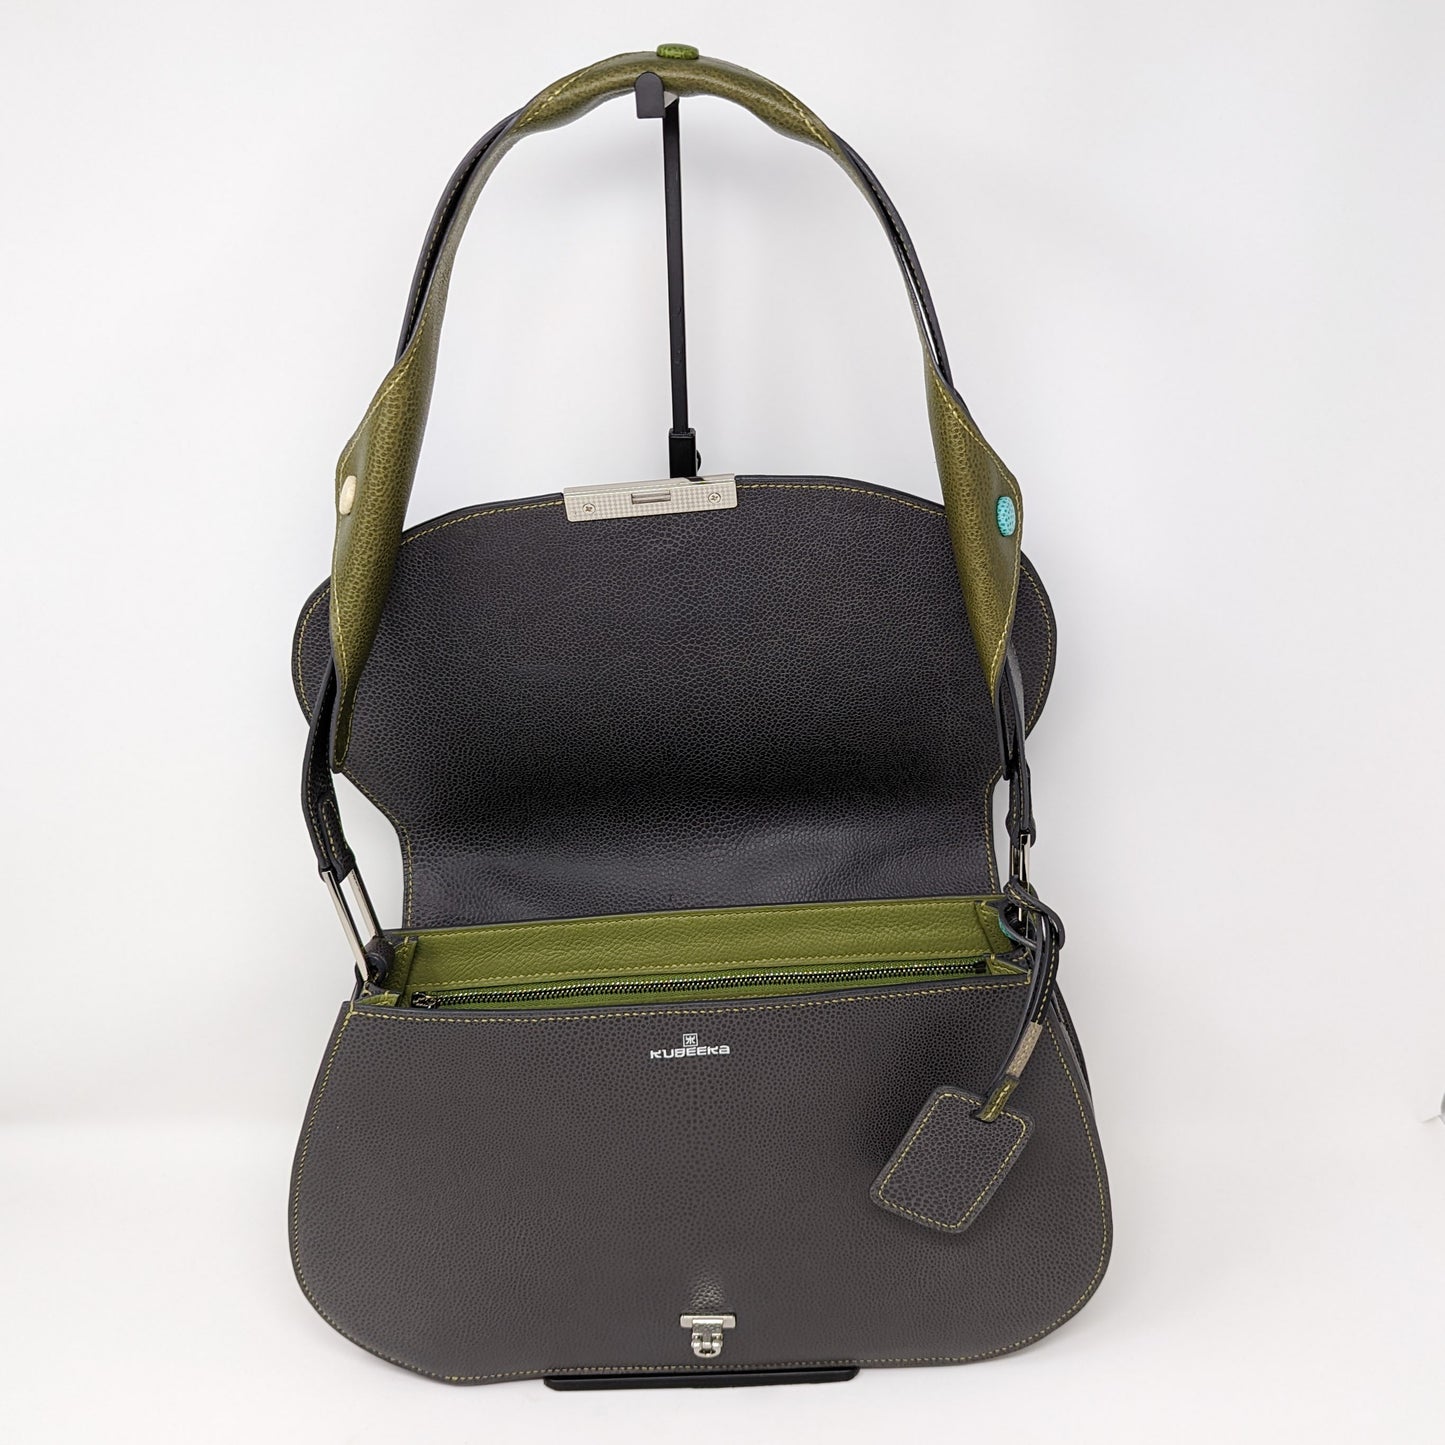 Molly Graphite with Removable Shoulder Strap Wrap by Kubeeka